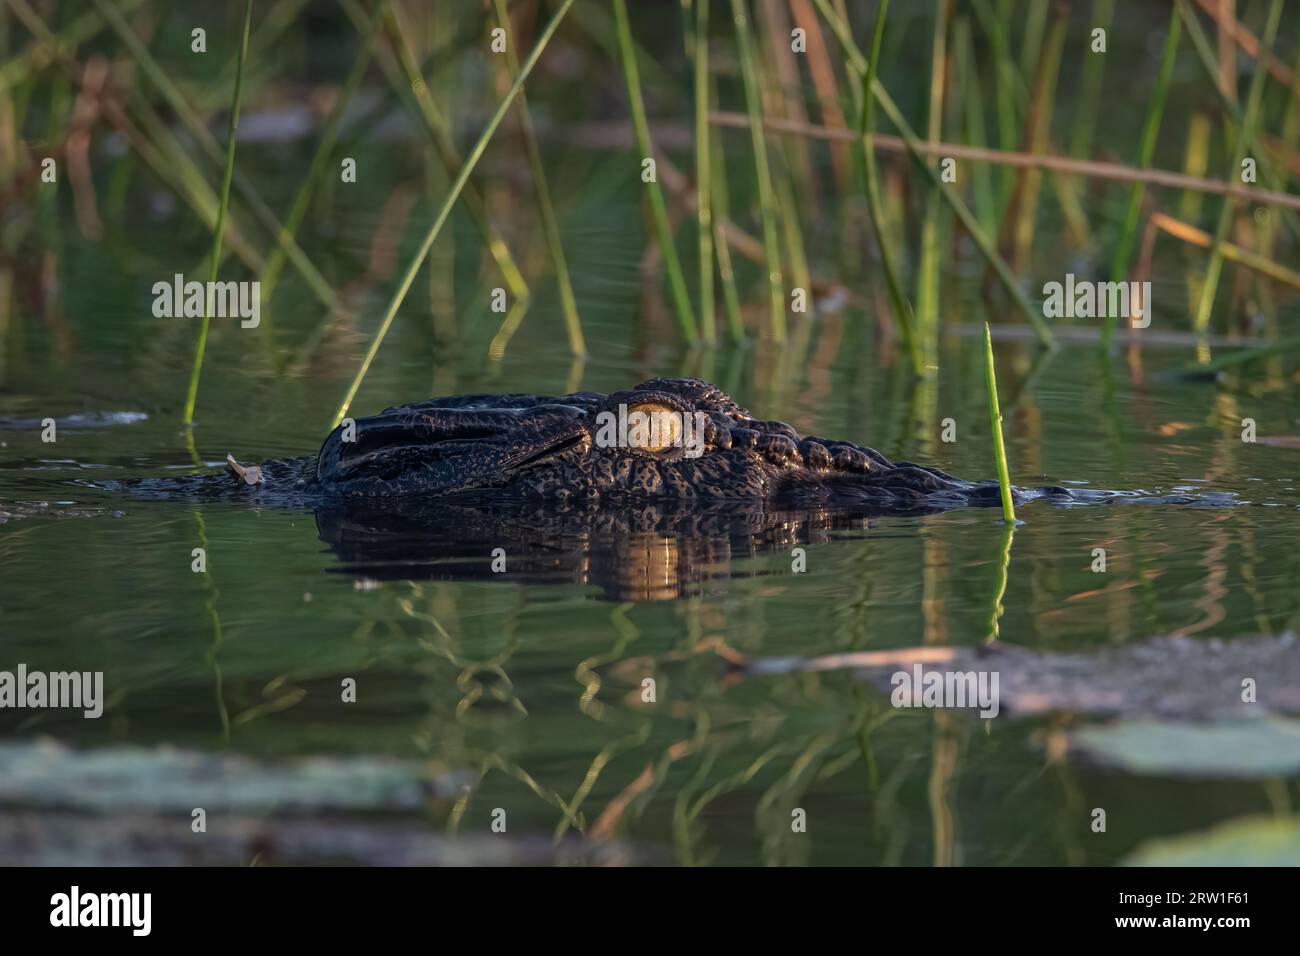 A master of stealth, the Saltwater Crocodile silently moves through the waterlilies. Northern Territory, Australia. Stock Photo